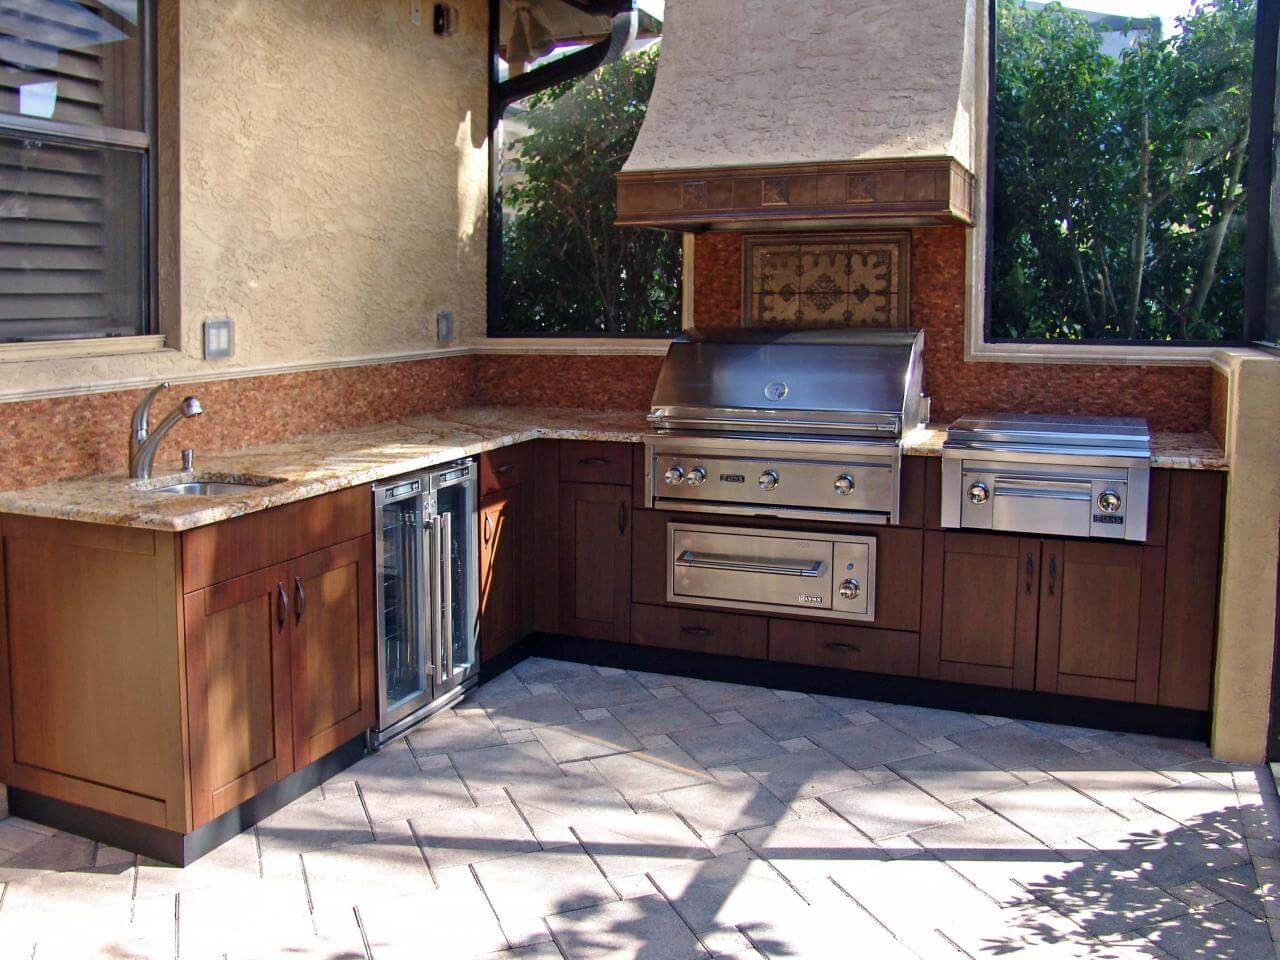 Build Outdoor Kitchen Cabinet
 How to Build Outdoor Kitchen Cabinets AllstateLogHomes